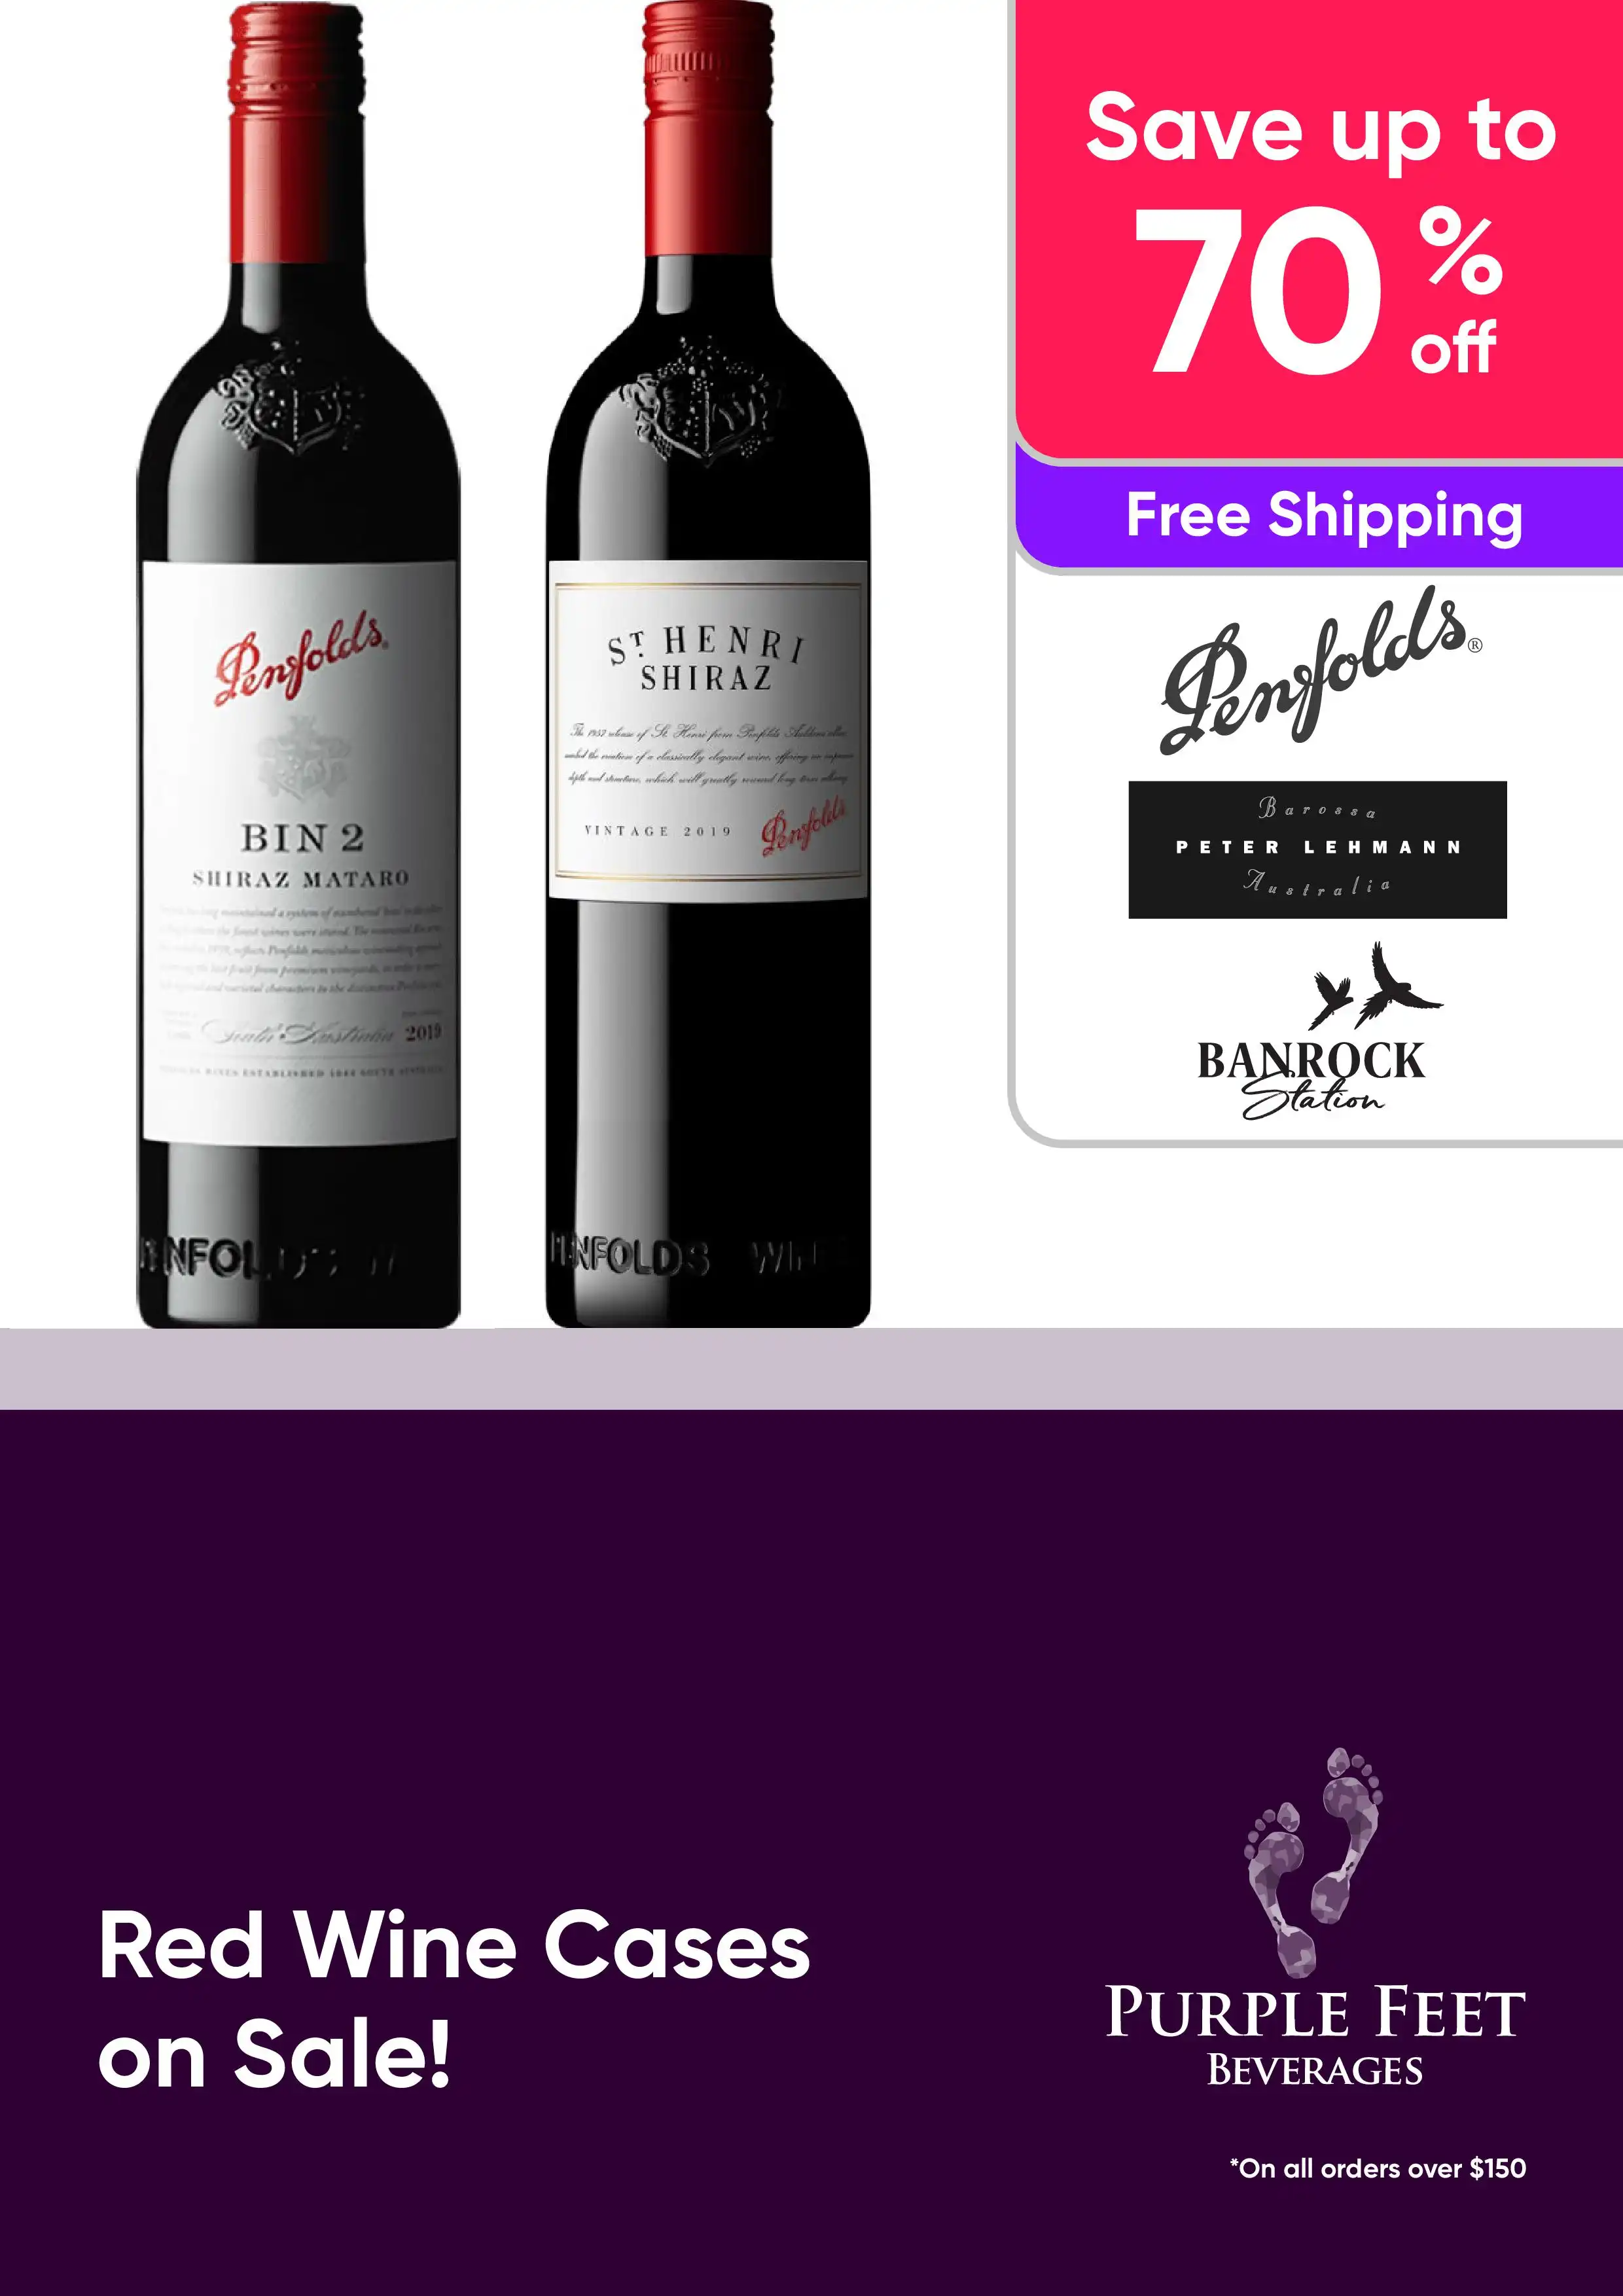 Red Wine Cases on Sale! - Penfolds, Peter Lehmann, Banrock Station - Save Up to 70%